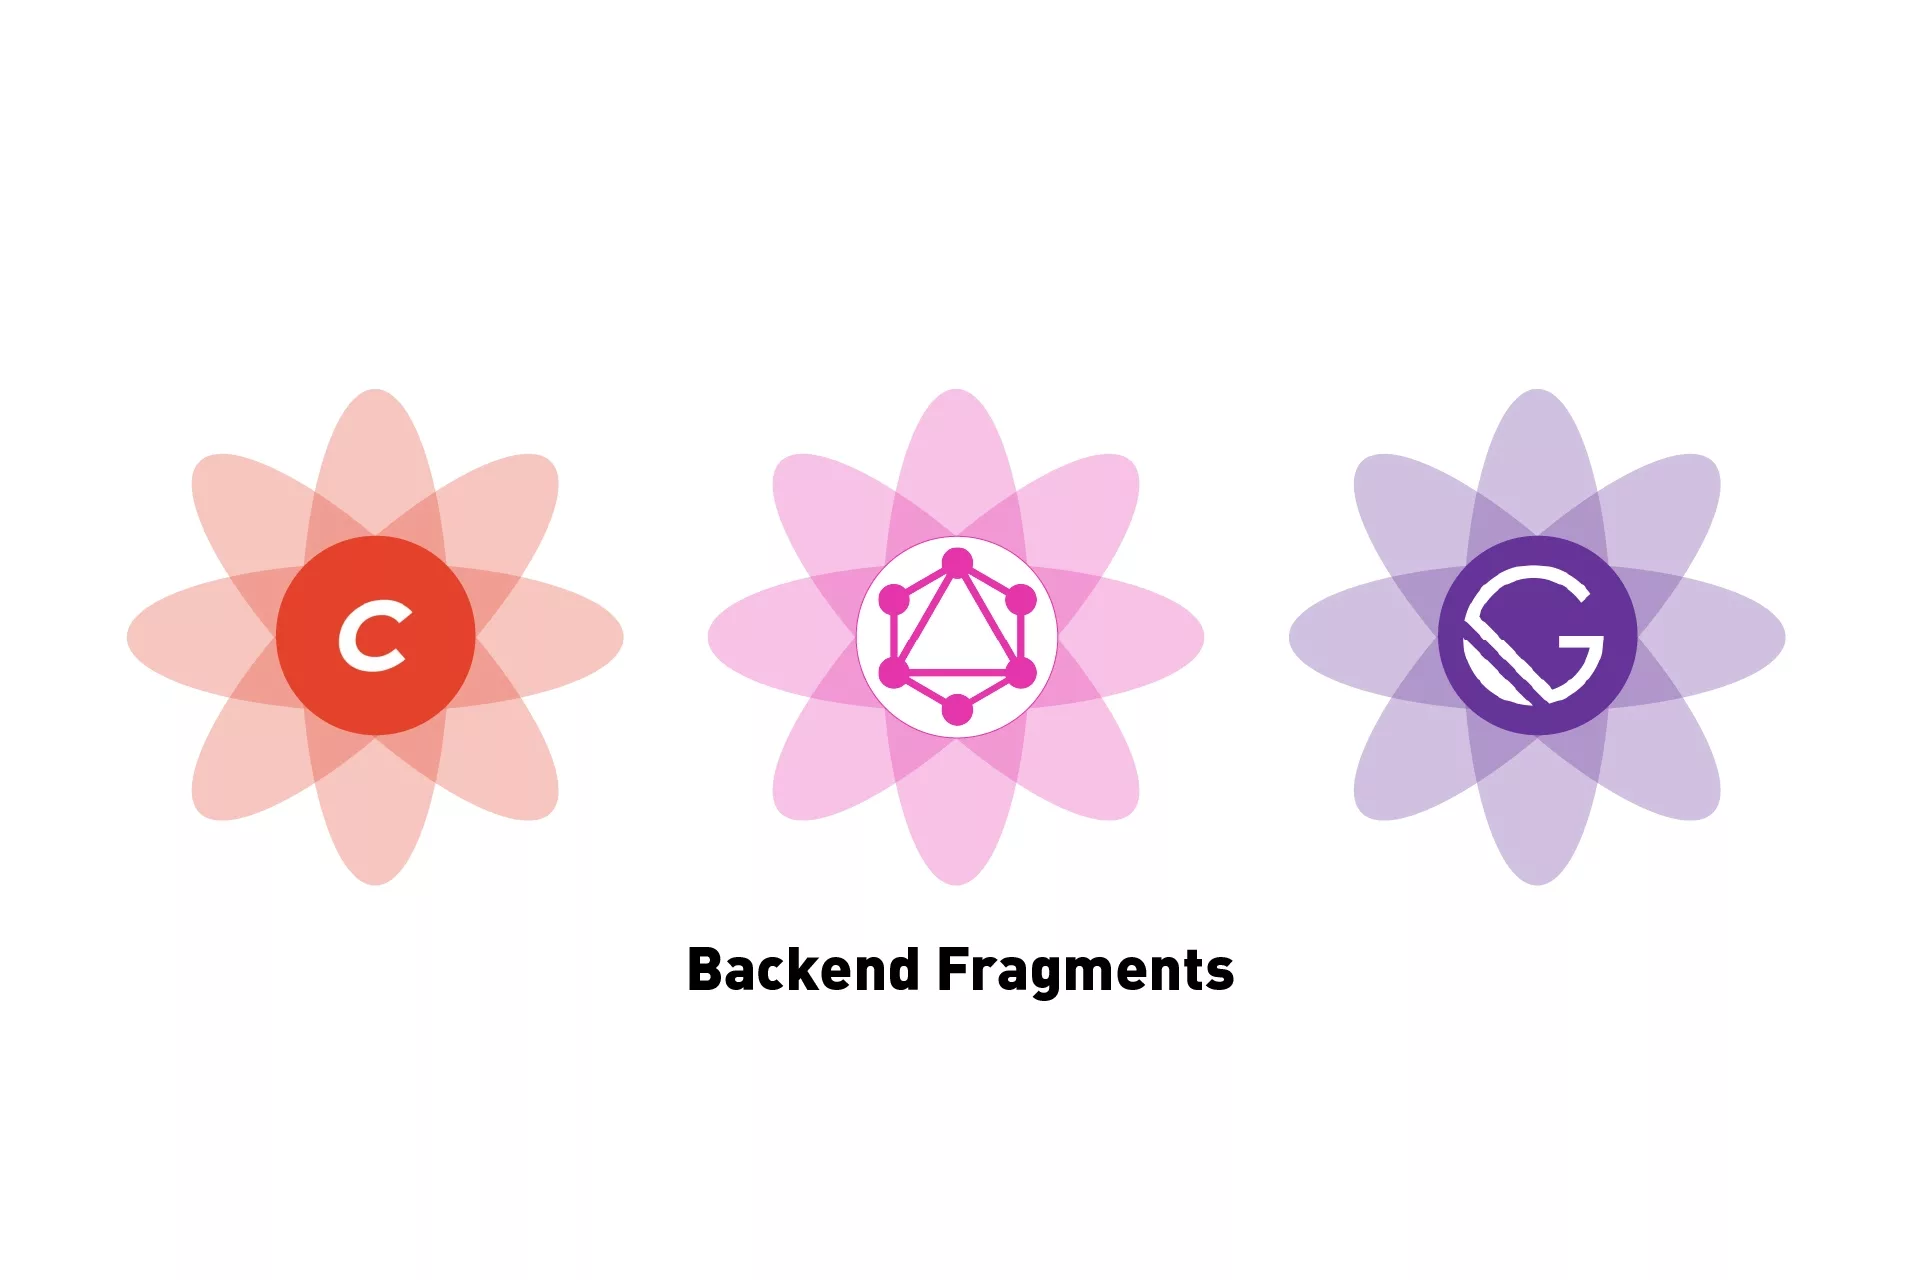 Three flowers that represent Craft CMS, GraphQL and GatsbyJS side by side, beneath it sits the text 'Backend Fragments'.